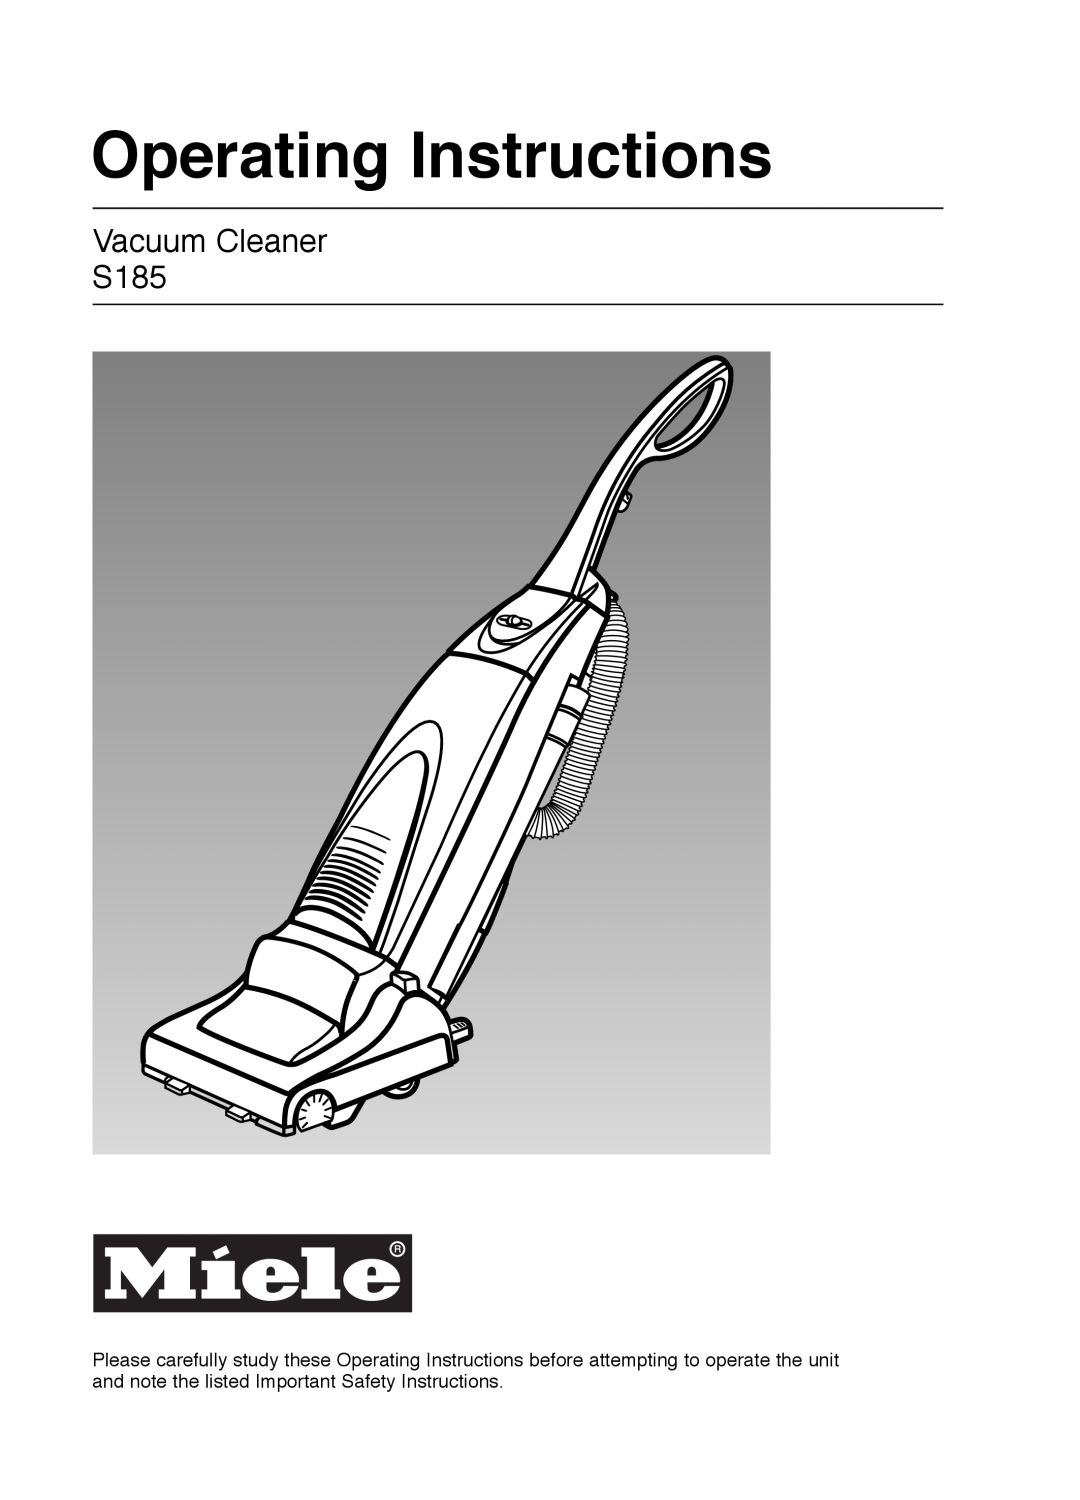 Miele important safety instructions Operating Instructions, Vacuum Cleaner S185 